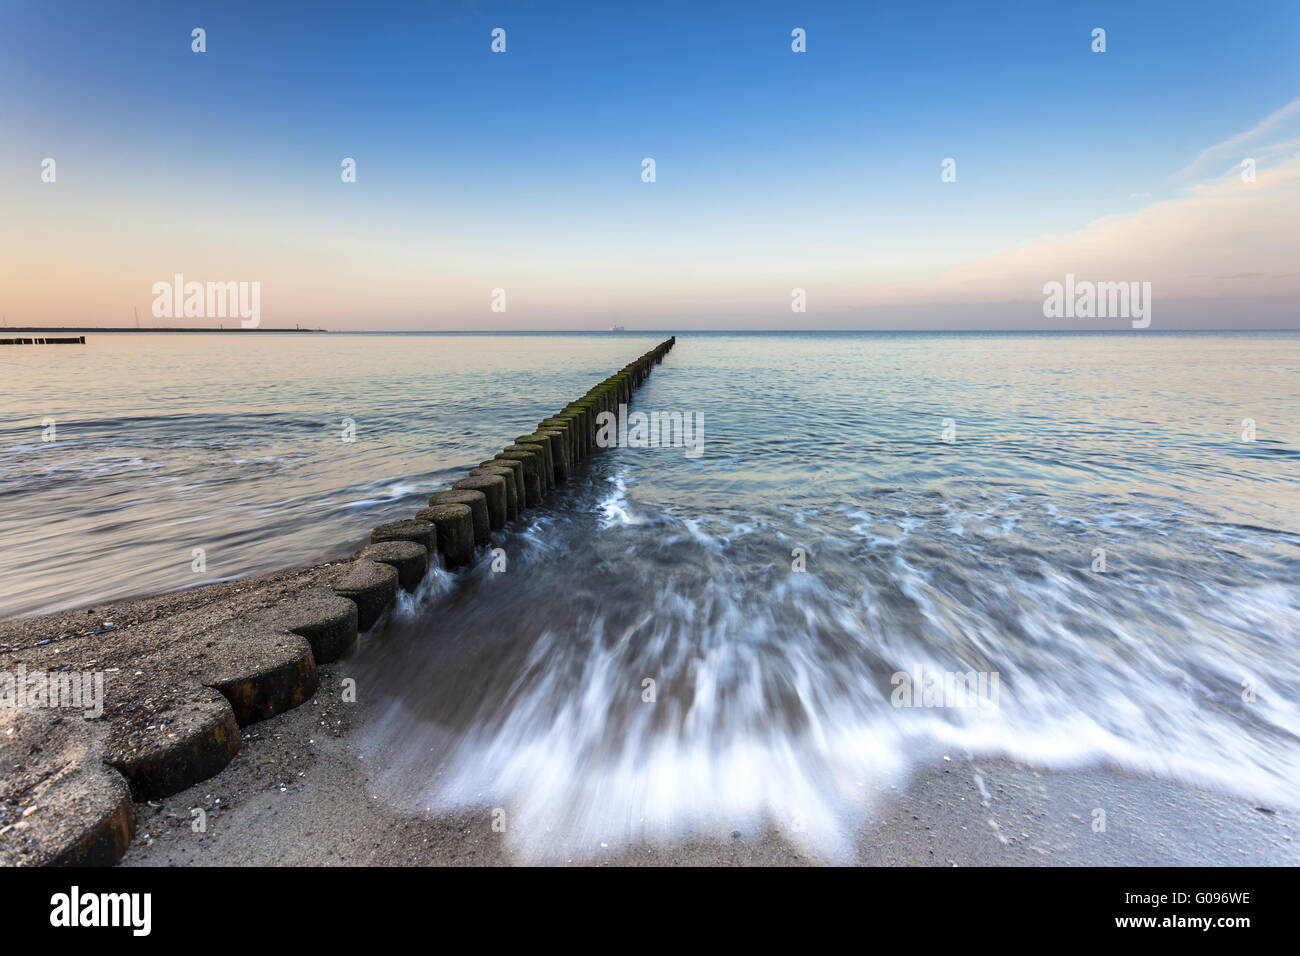 wooden groynes at the beach of german baltic sea Stock Photo